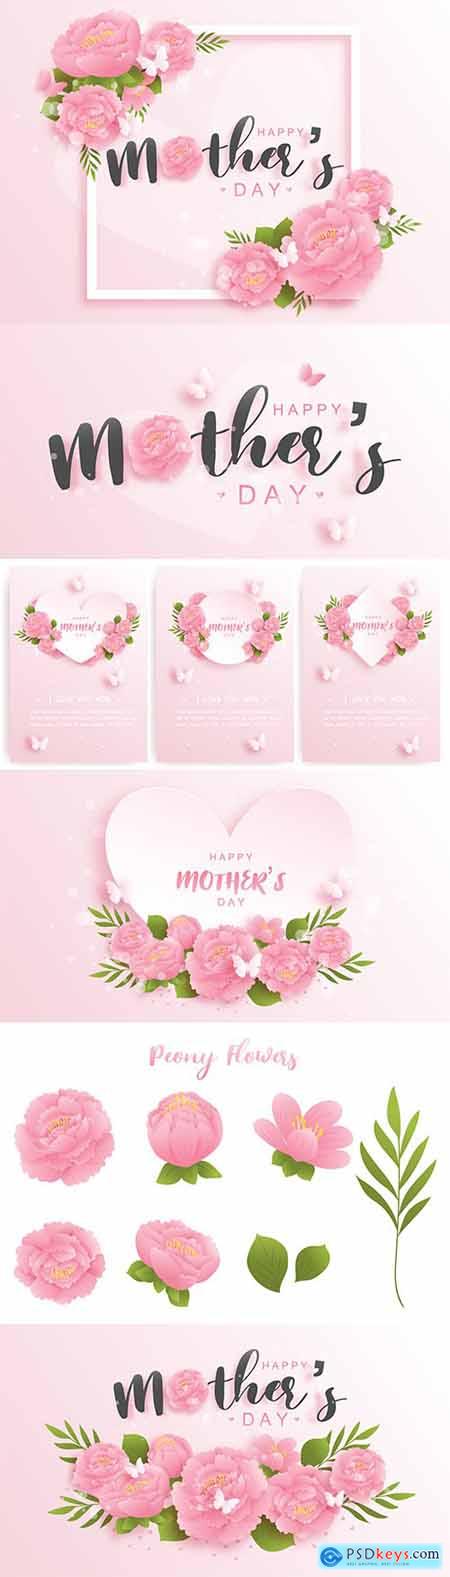 Happy Mother s Day background with colorful flowers